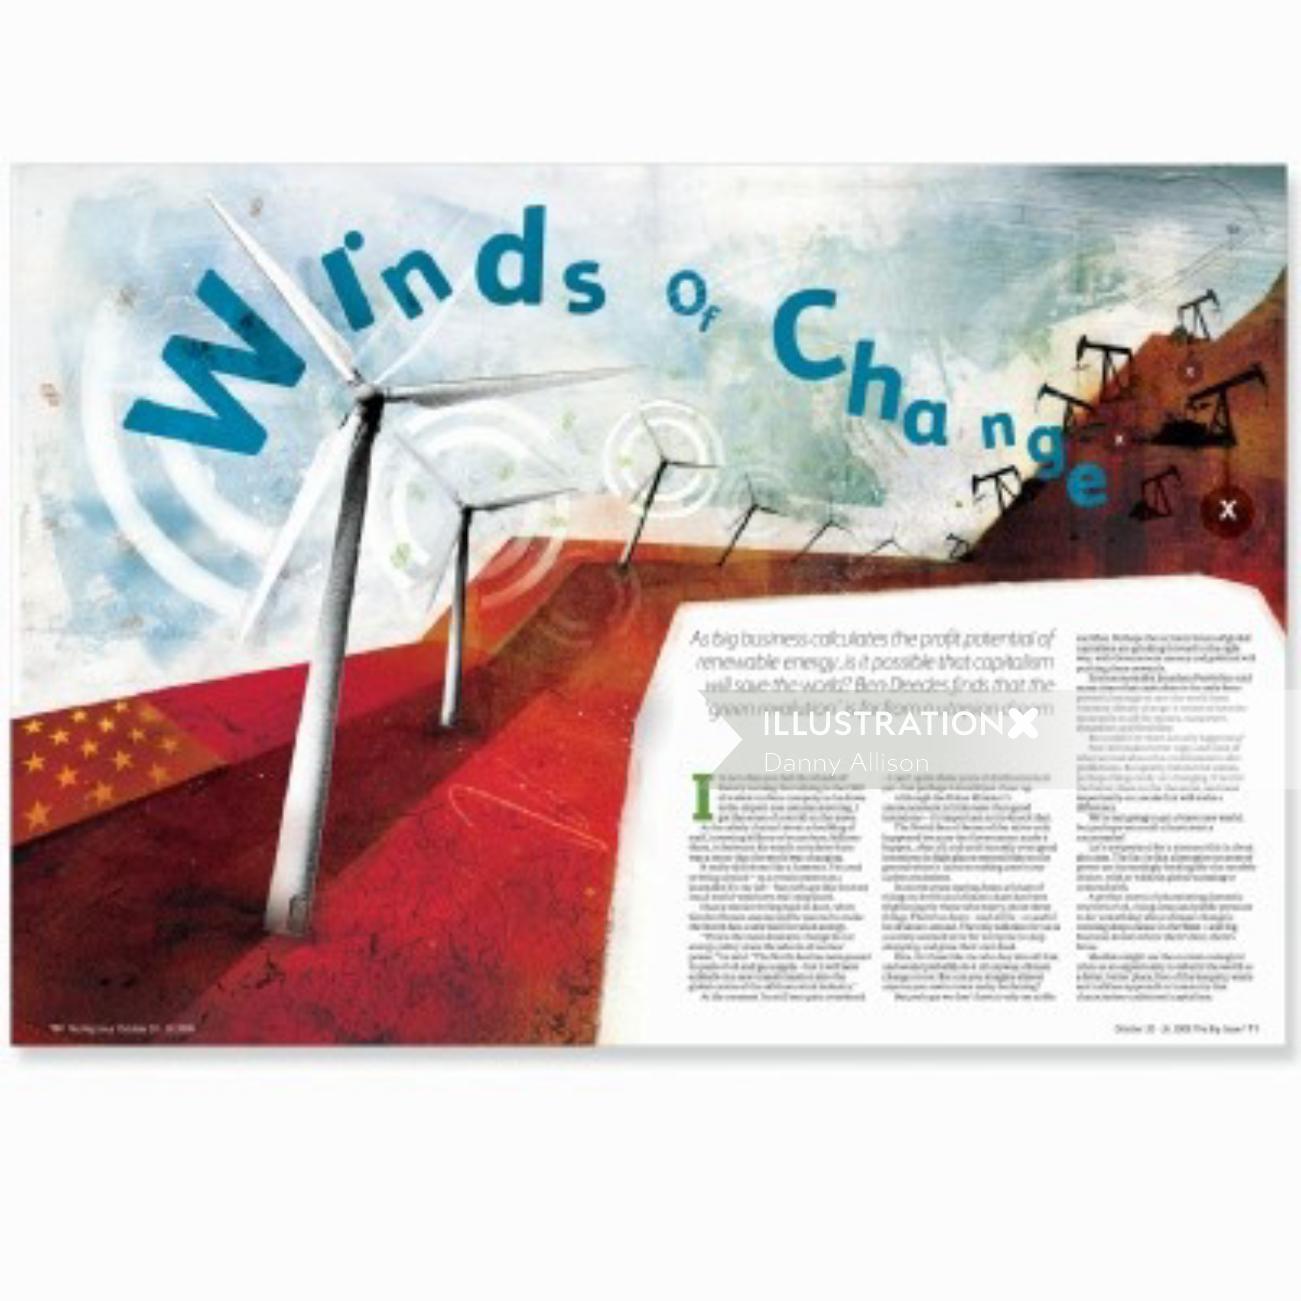 wind mill magazine, text in blue color, description on the paper